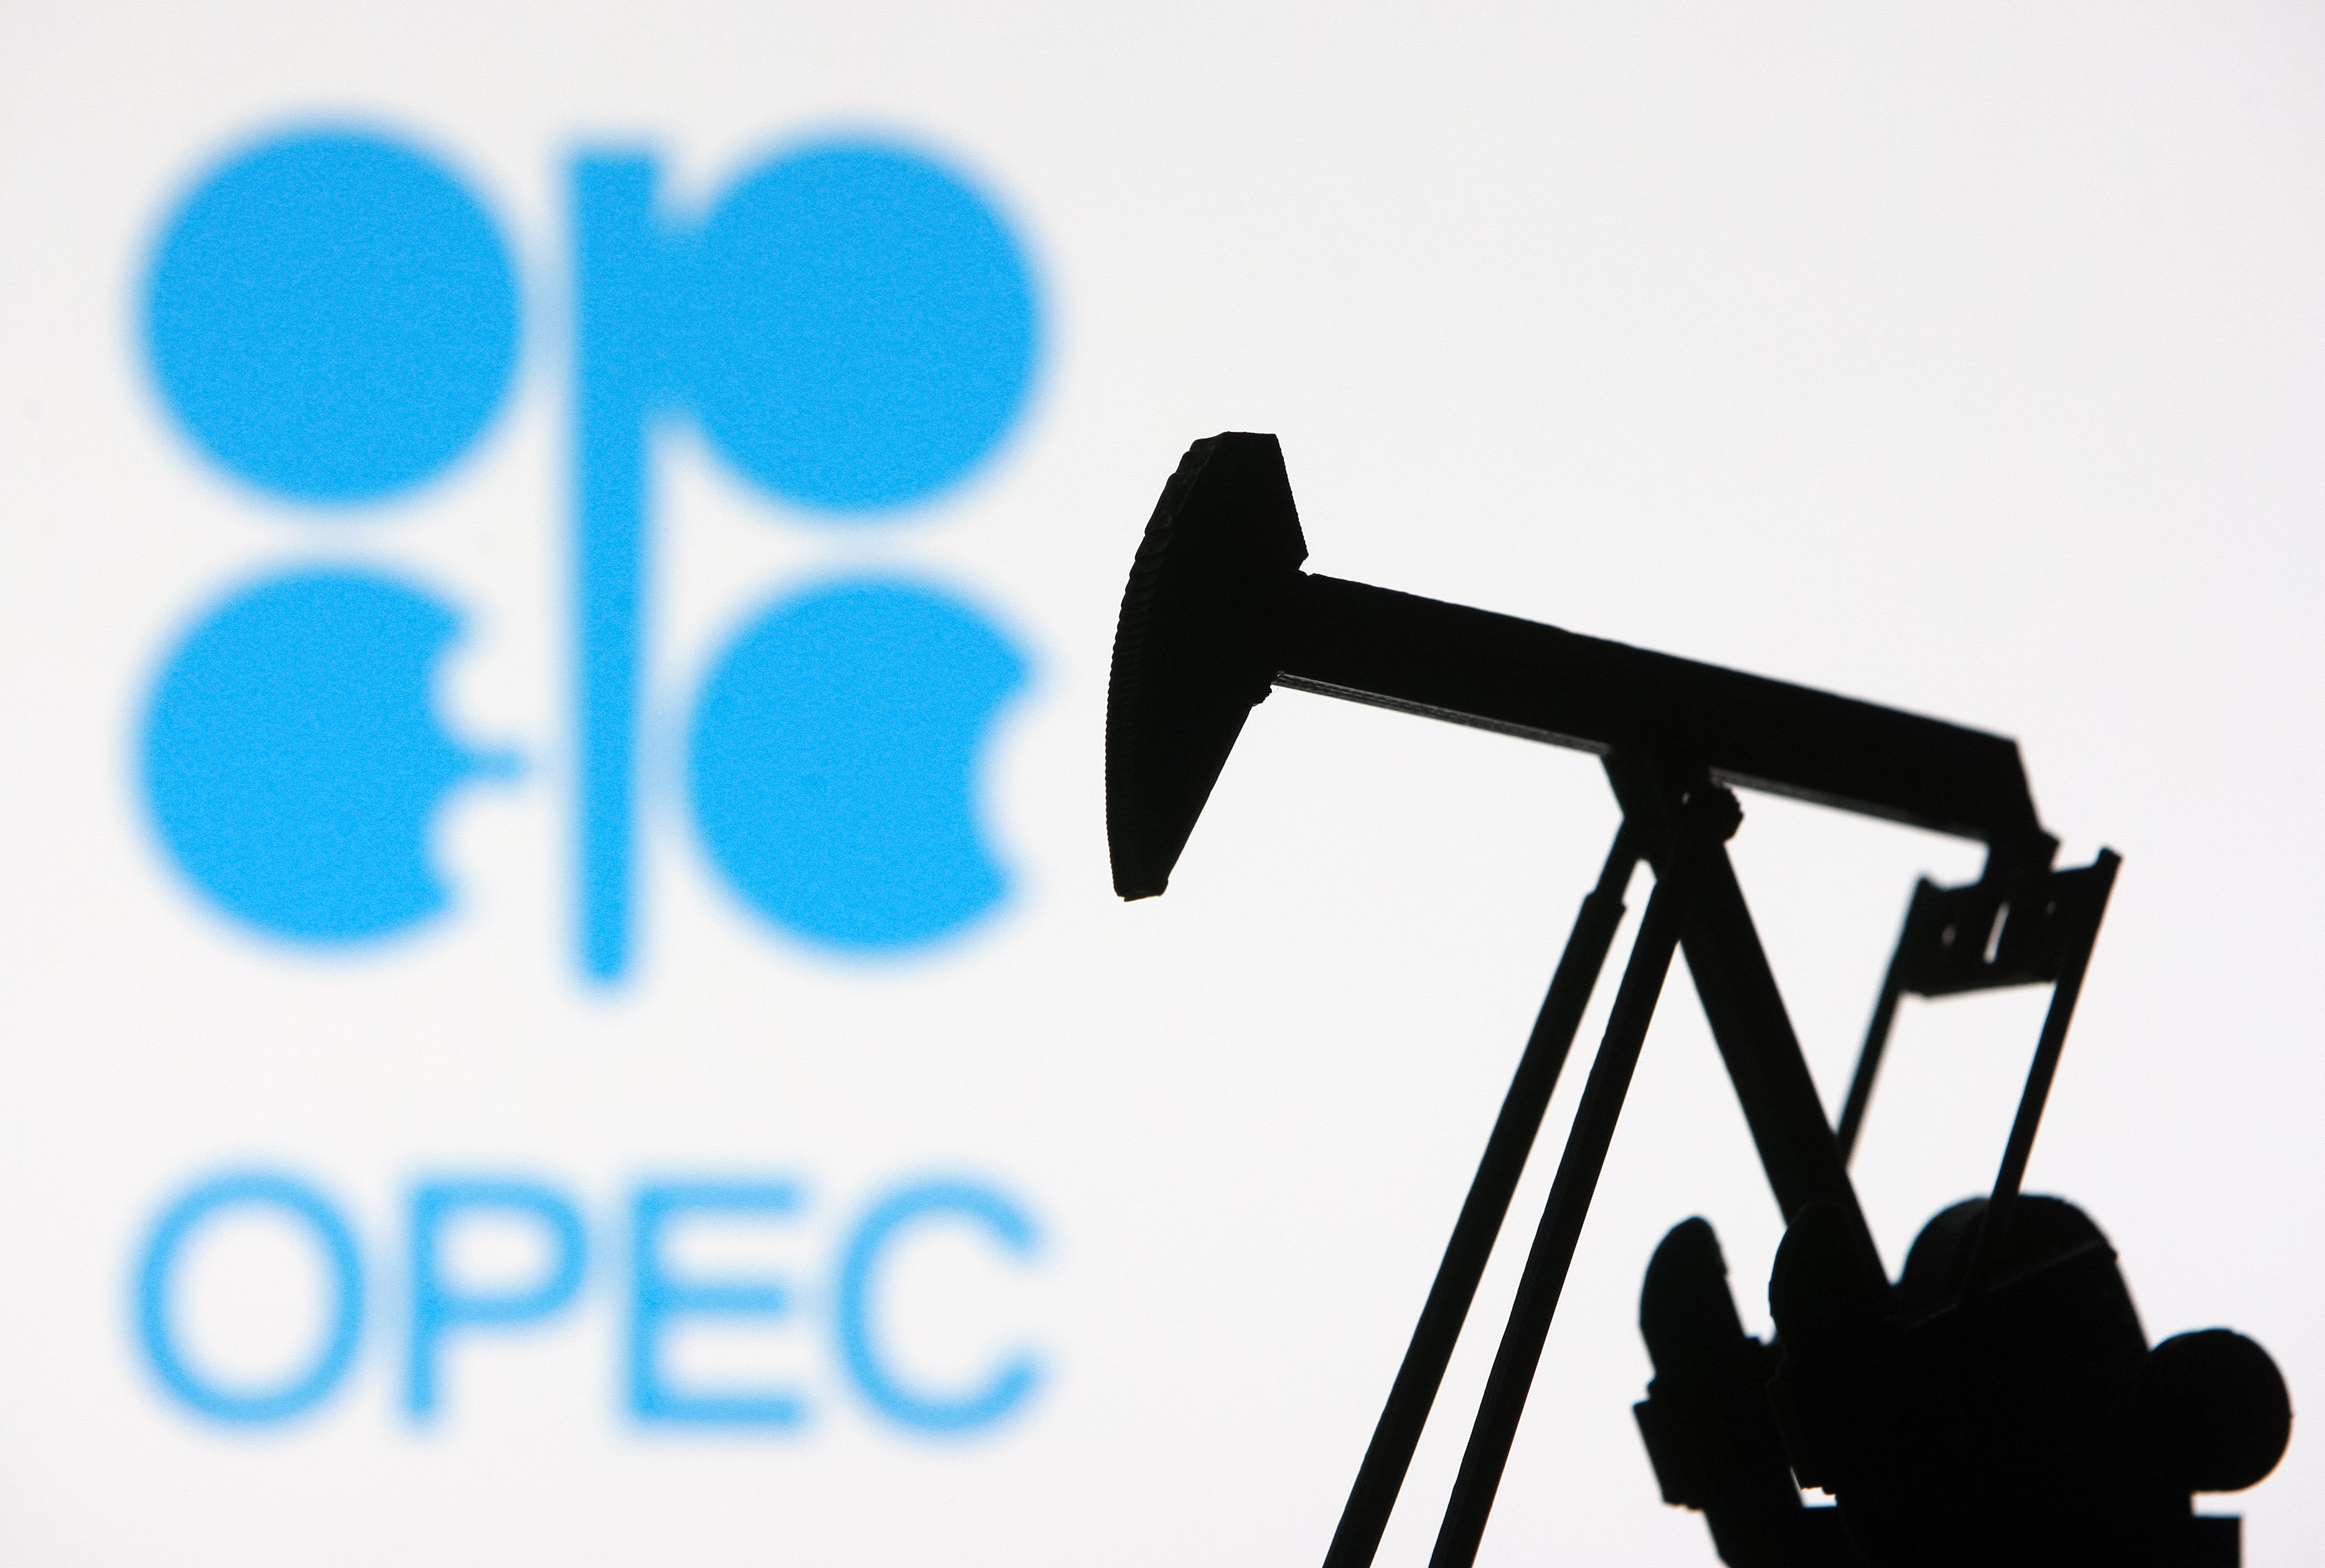 OPEC+ continues its aim to reduce oil output by 2 million bpd